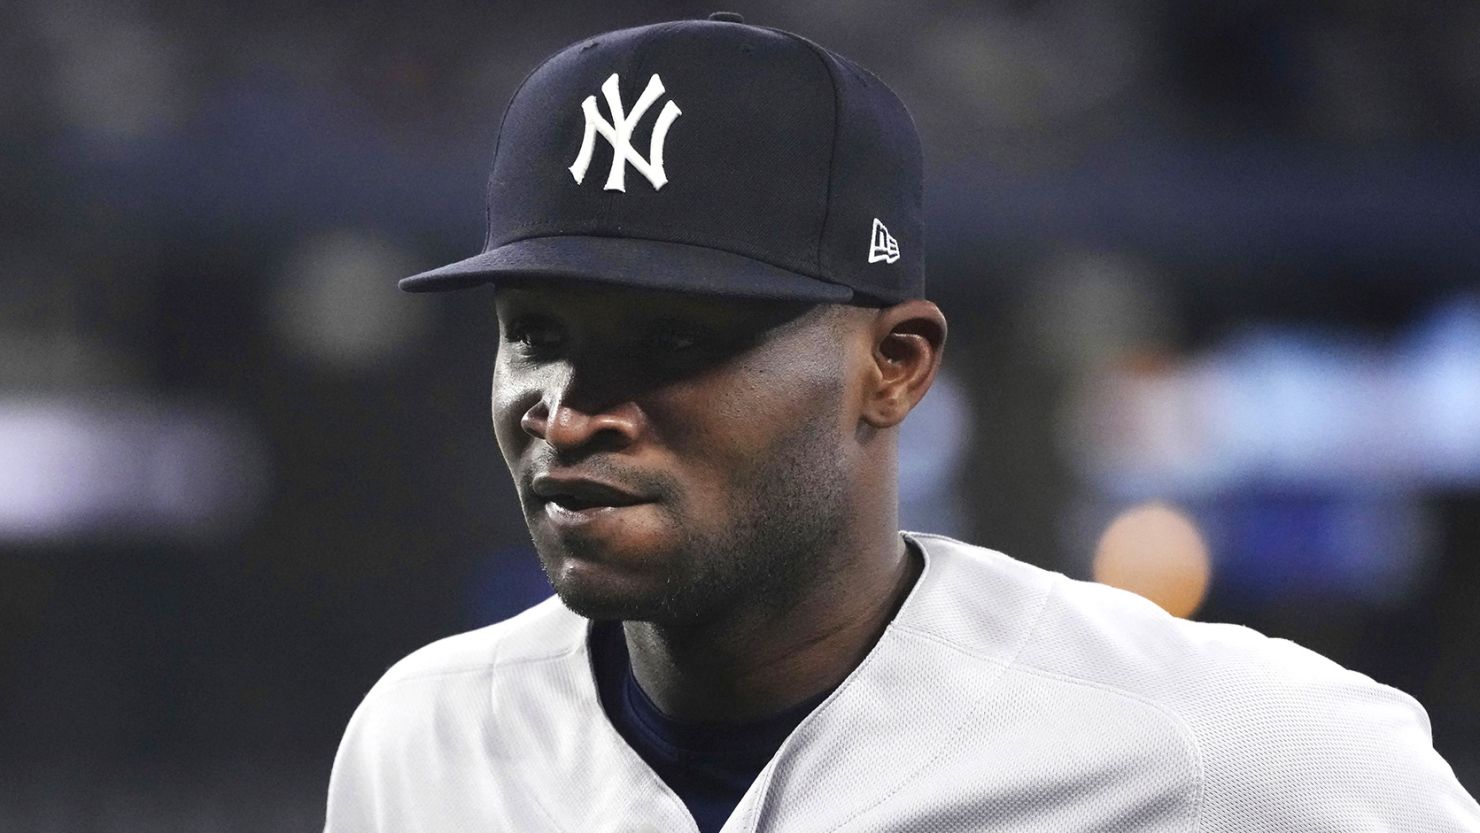 New York Yankees starting pitcher Domingo Germán ejected; faces suspension  for 'extremely sticky' substance